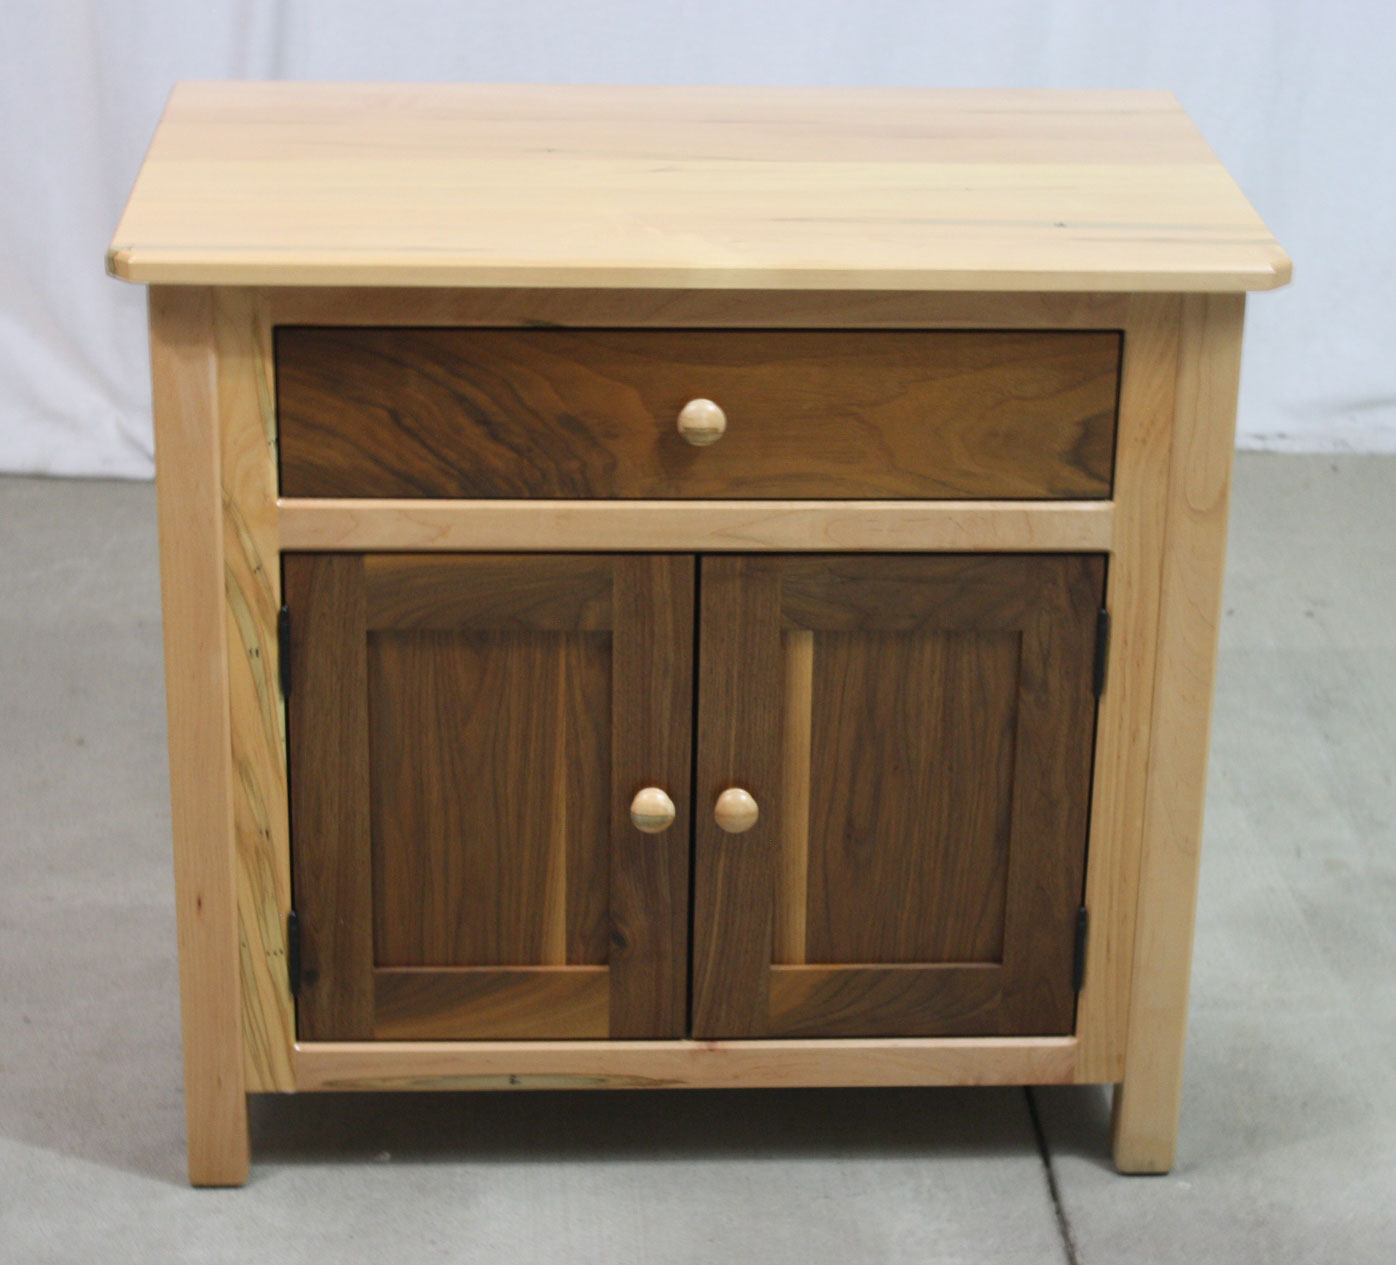 Cornwell Deluxe Nightstand in Wormy Maple and Character Walnut